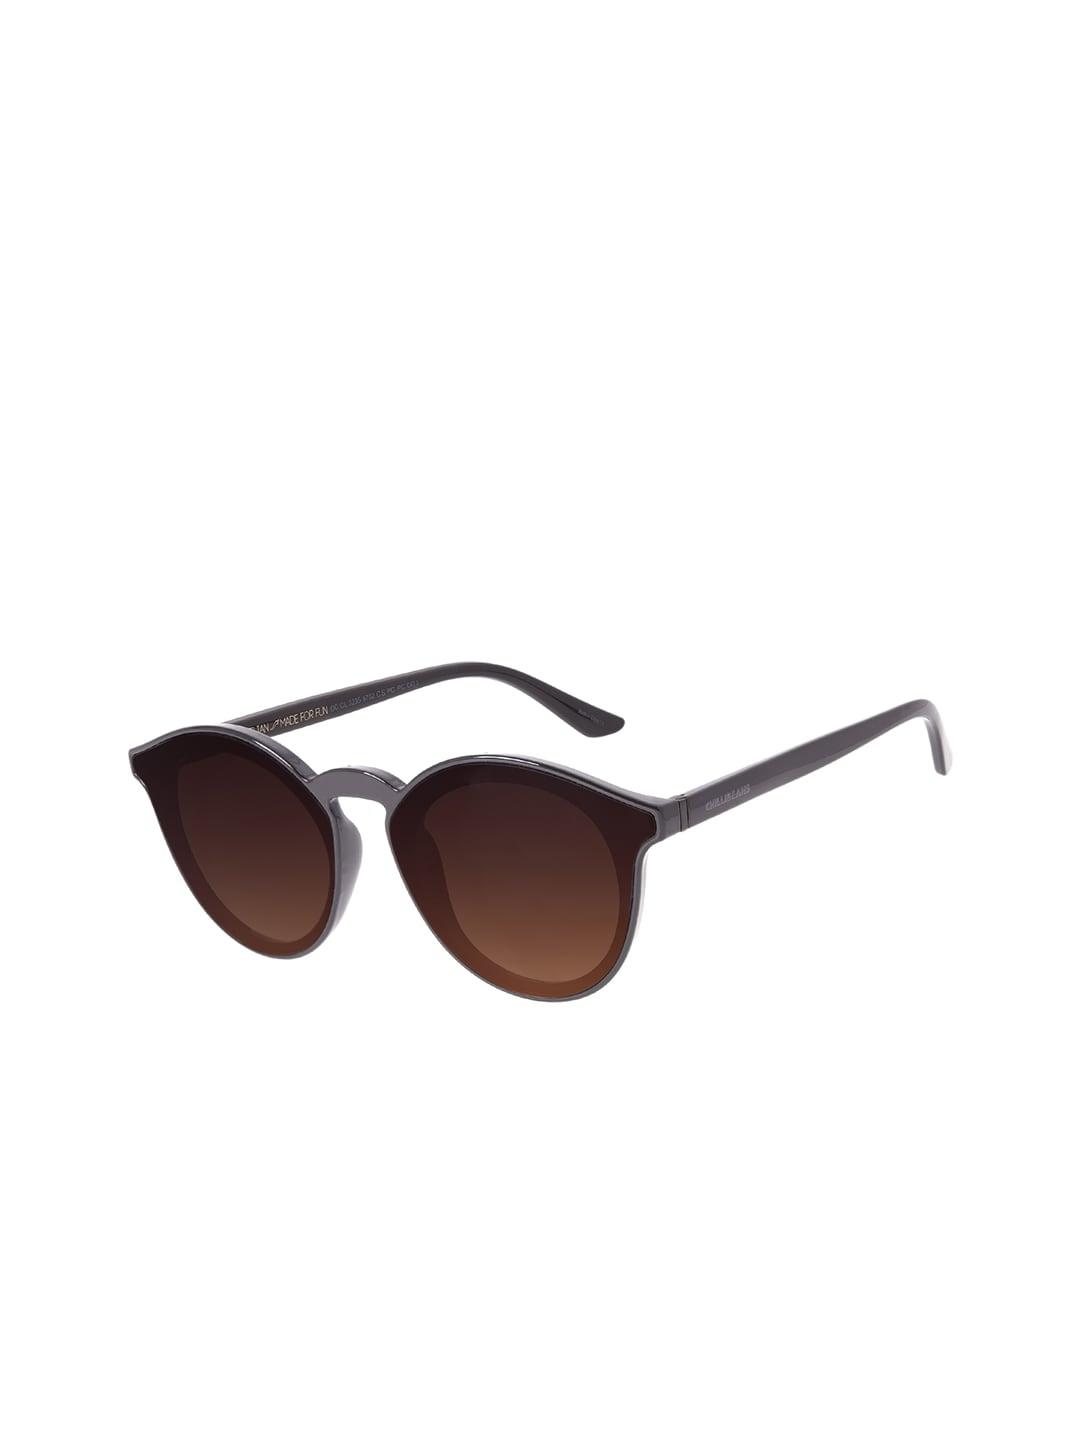 chilli-beans-unisex-brown-lens-&-black-round-sunglasses-with-uv-protected-lens